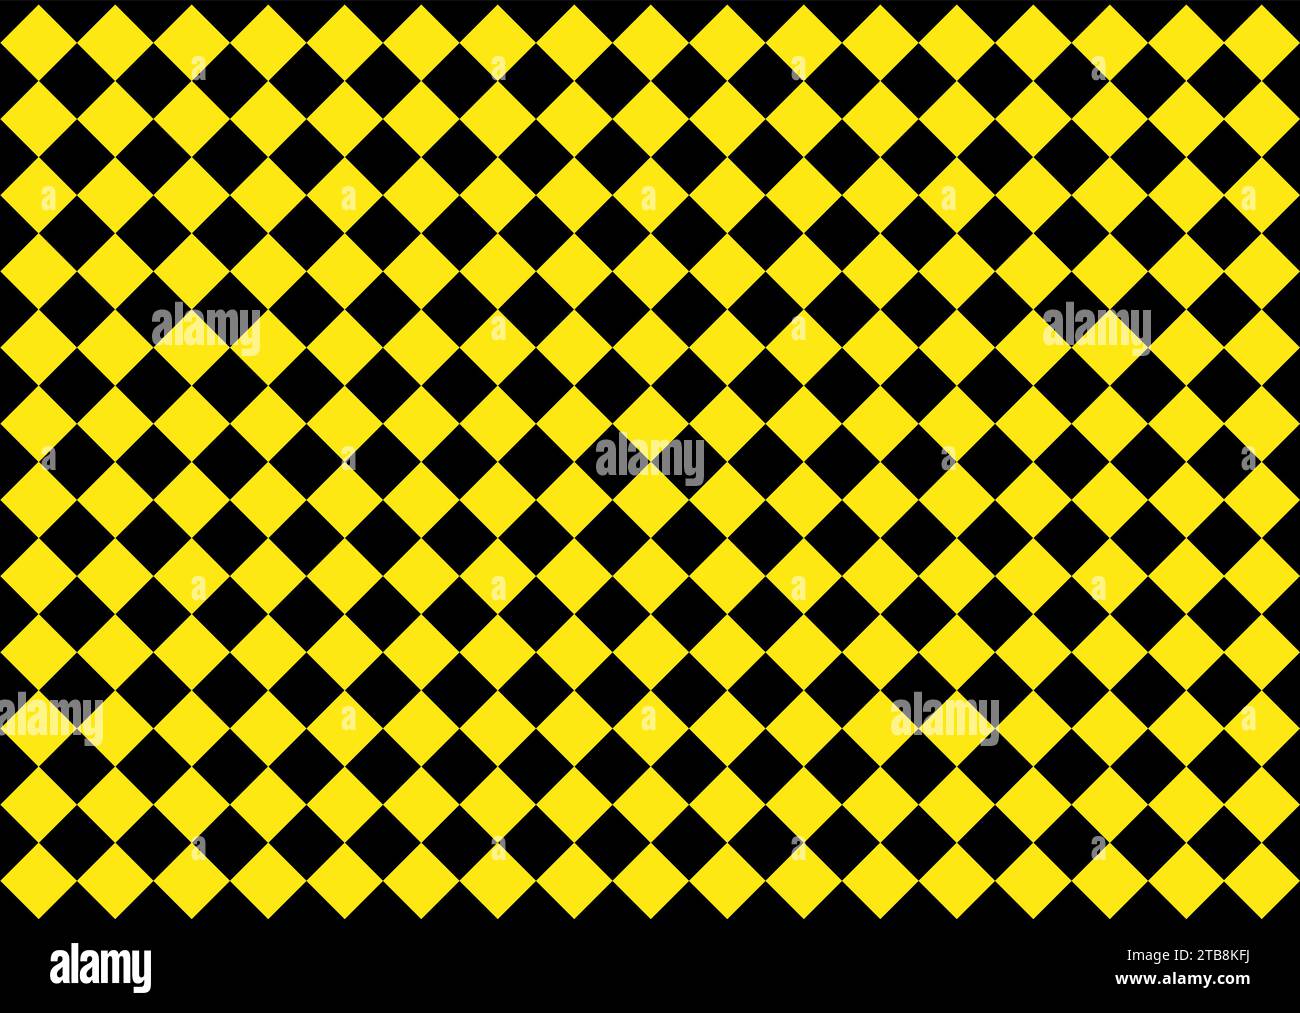 Black and Yellow seamless geometric pattern background Stock Vector